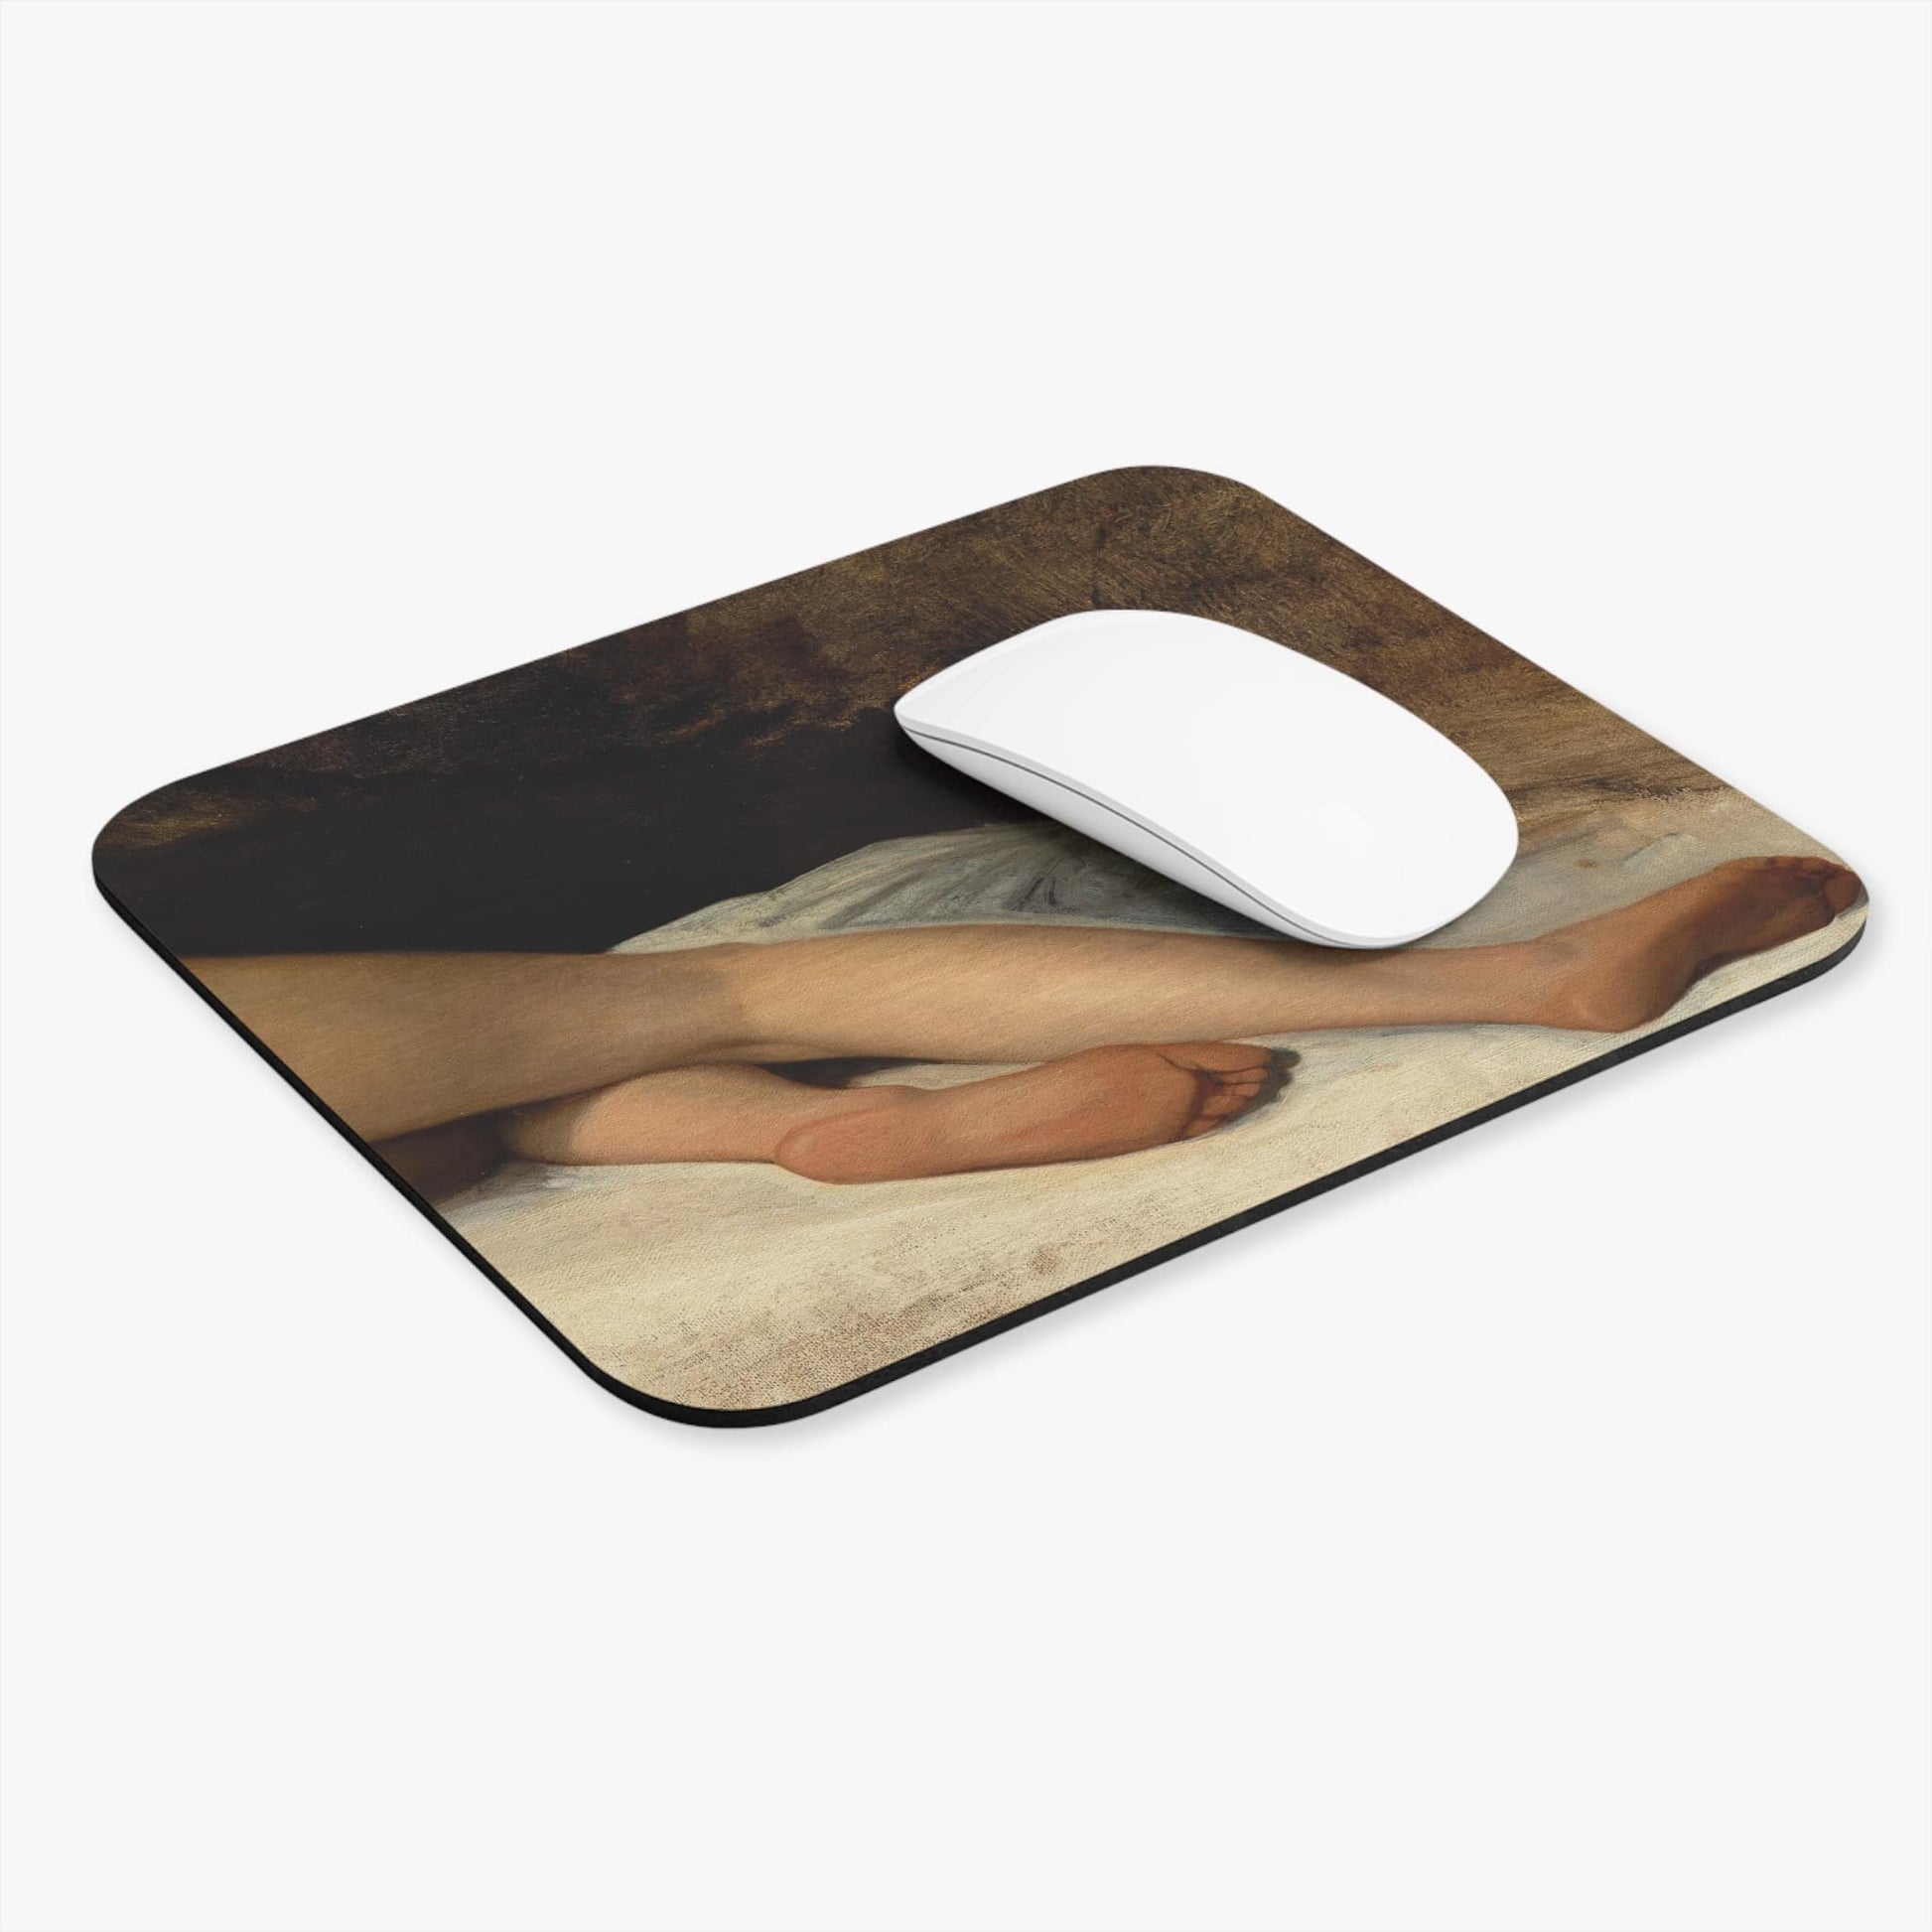 Sensual Posing Computer Desk Mouse Pad With White Mouse